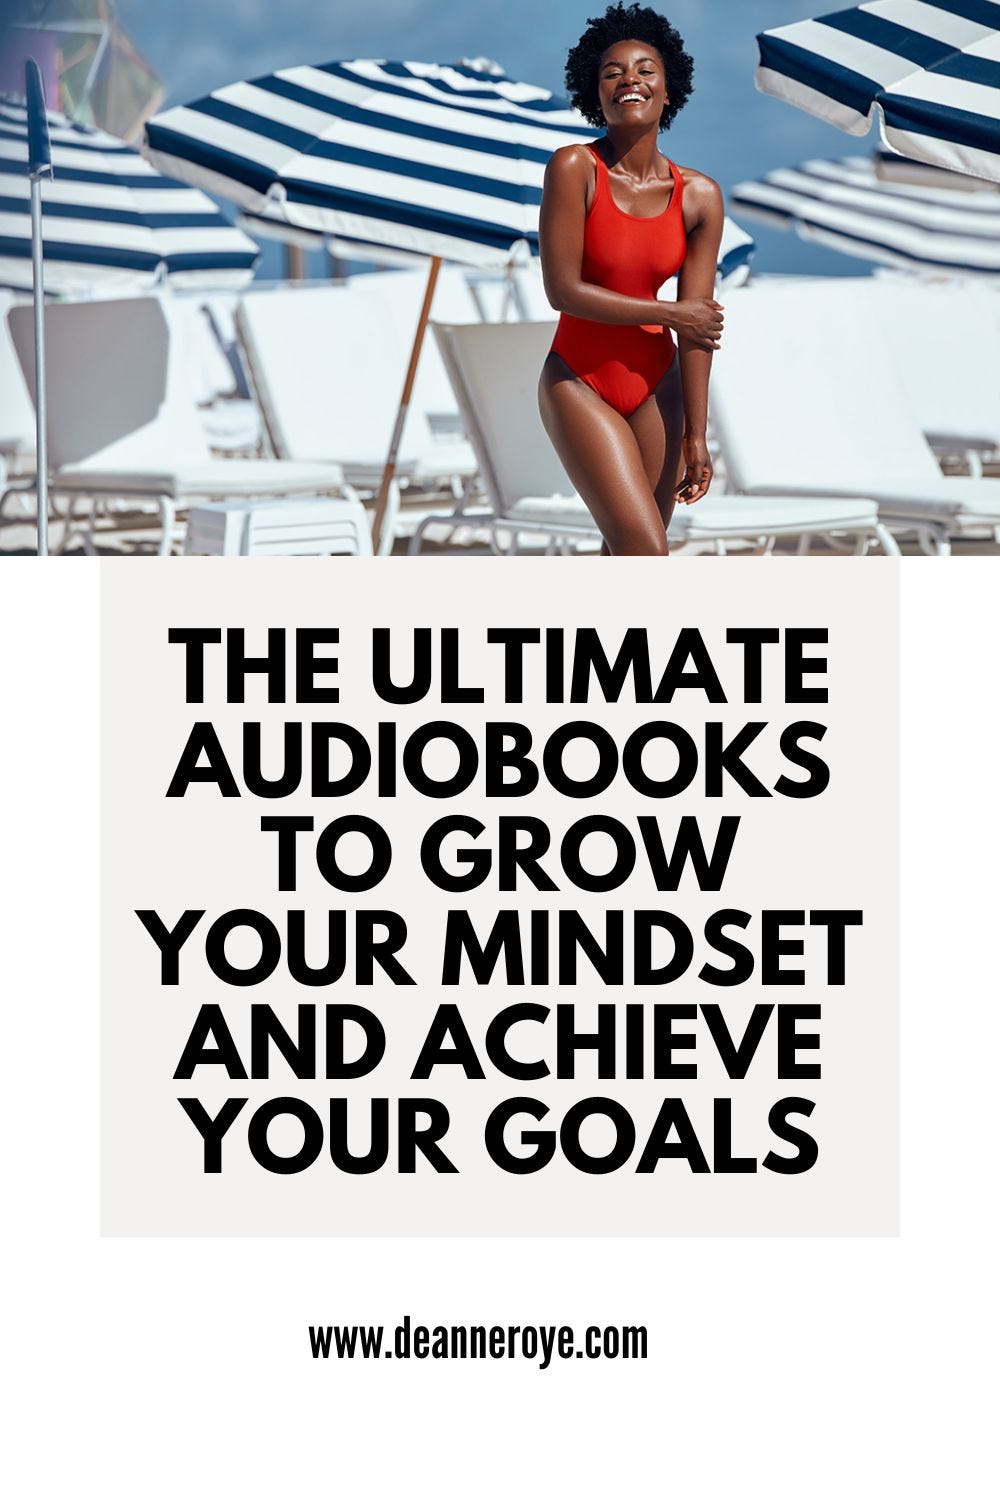 The Ultimate AudioBooks To Grow Your Mindset and Achieve Your Goals (Links  Available), by De'Anne Roye